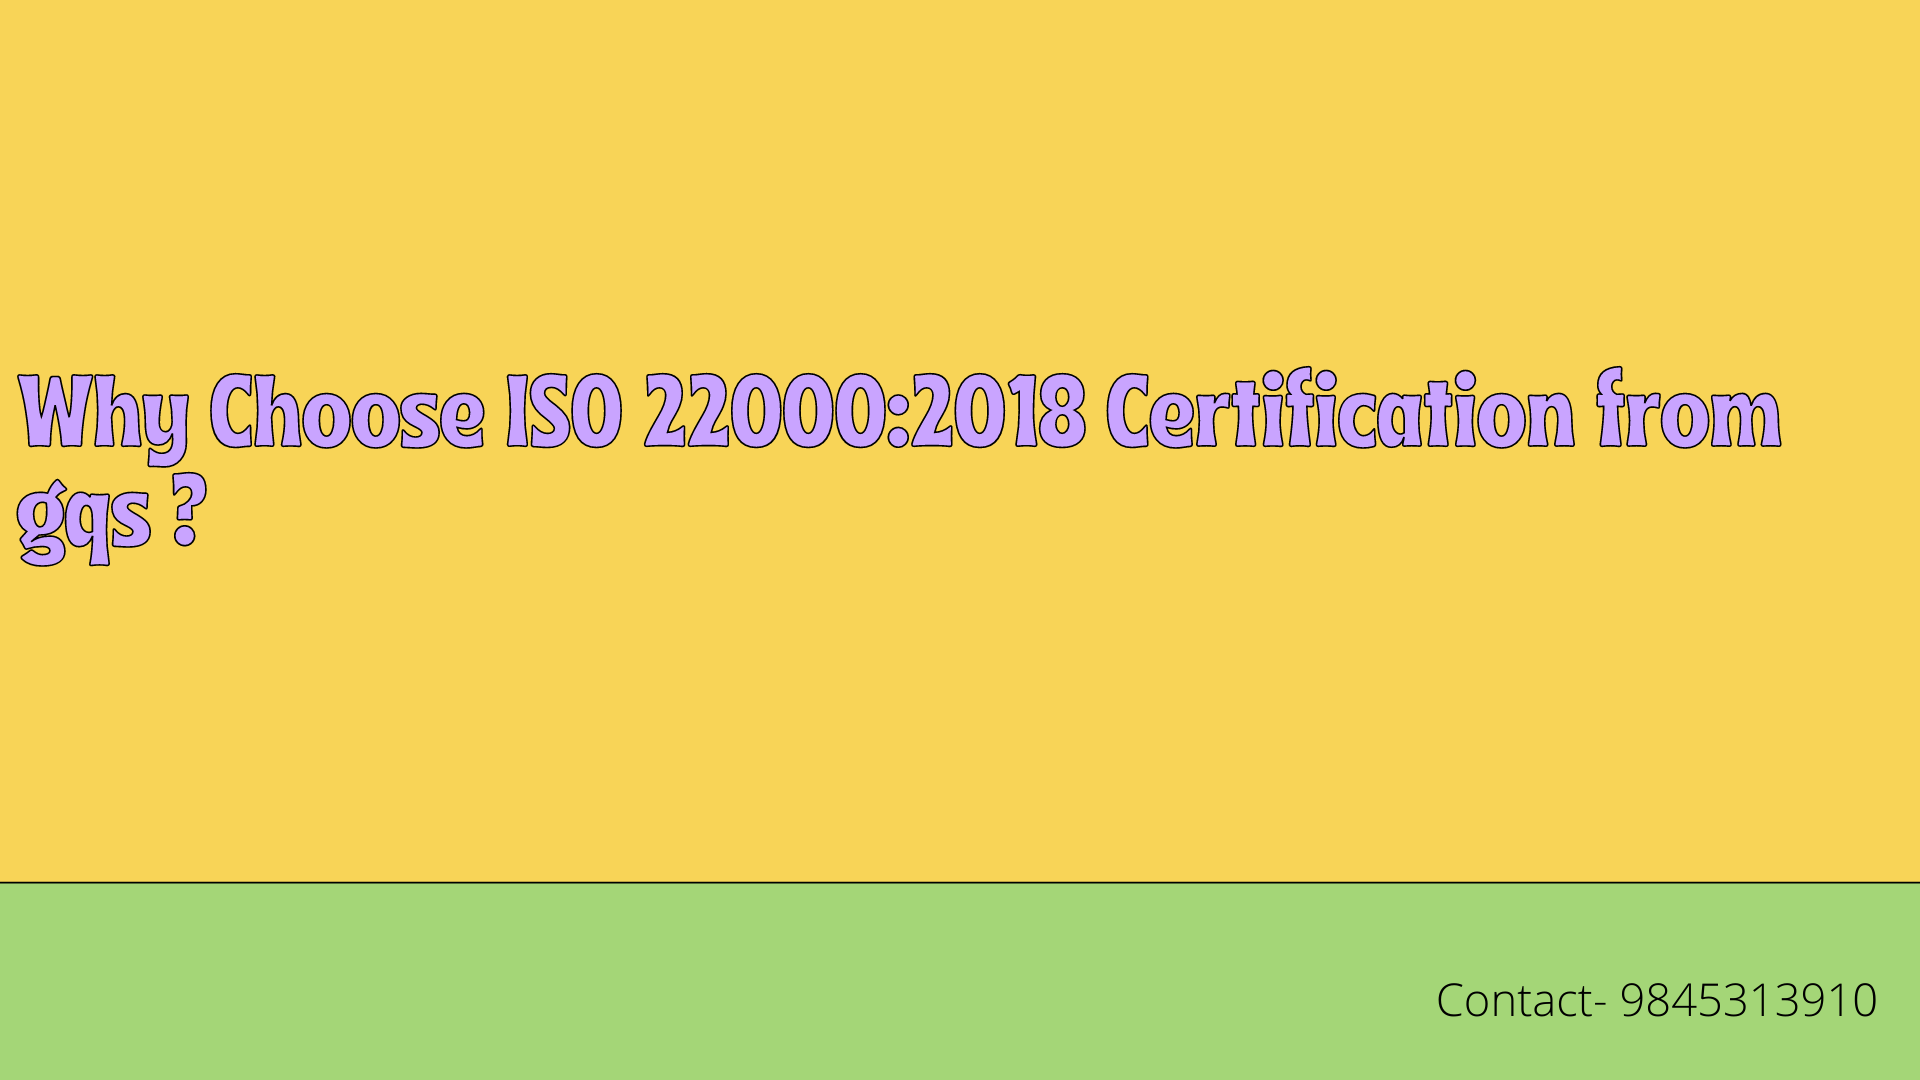 Why Choose ISO 220002018 Certification from gqs